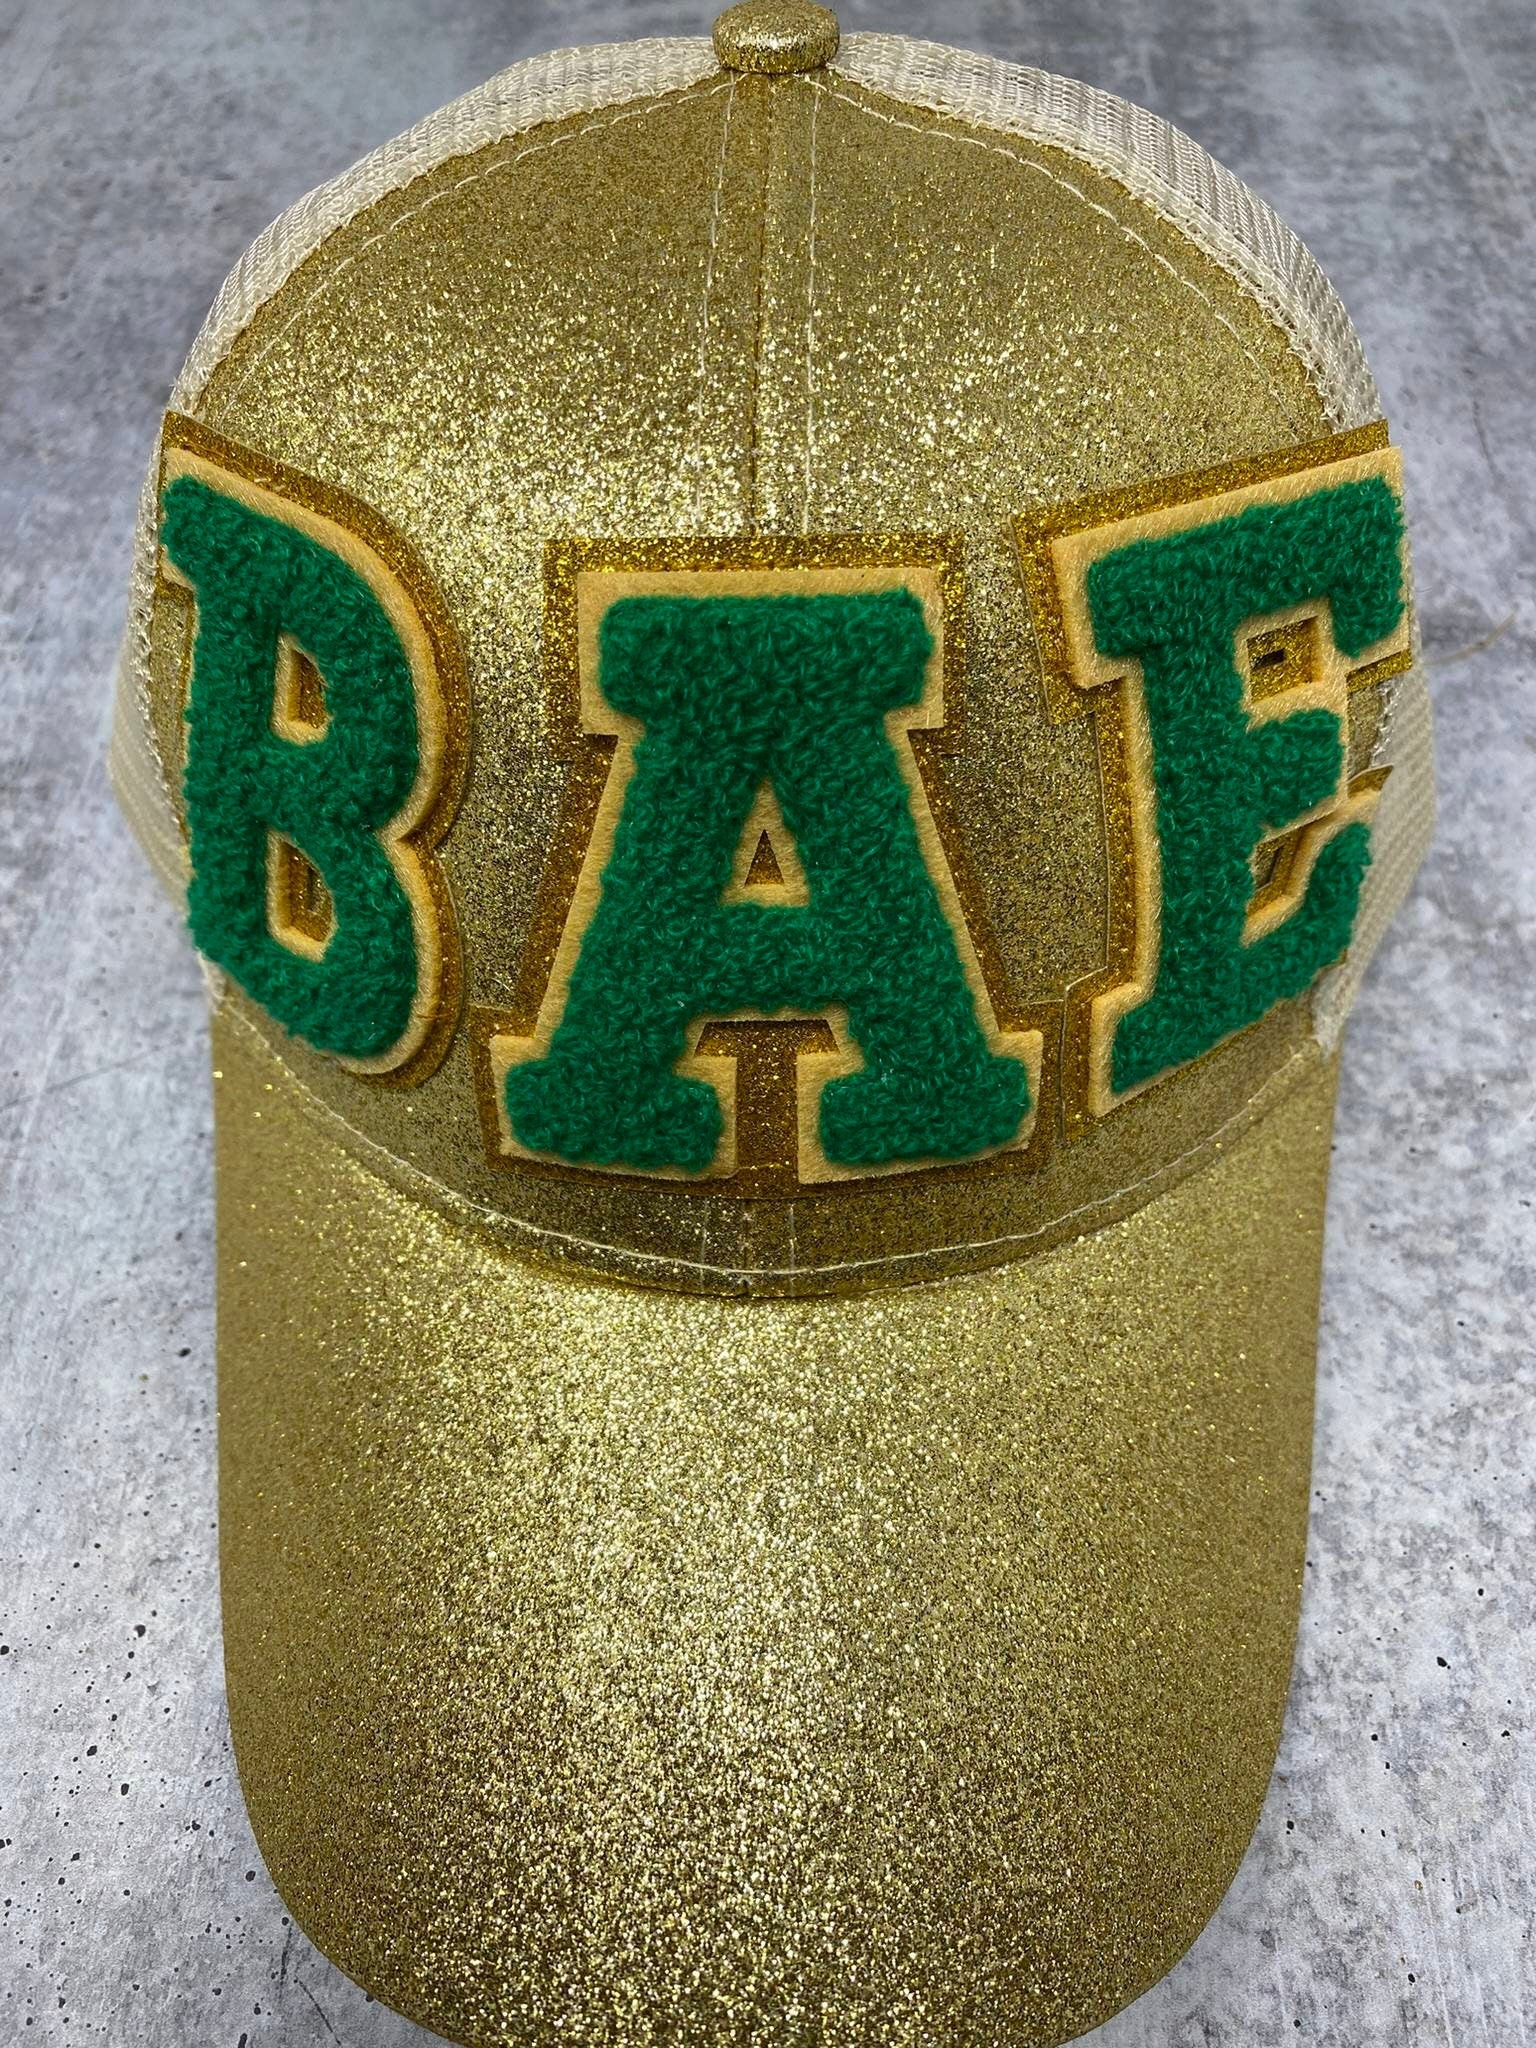 Chenille "BAE" Green & Gold Messy Bun/Ponytail Hat, Glitter Hat, Cute Bad Hair Day Hat, Fashionable Hat for Spring and Summer Hairstyle